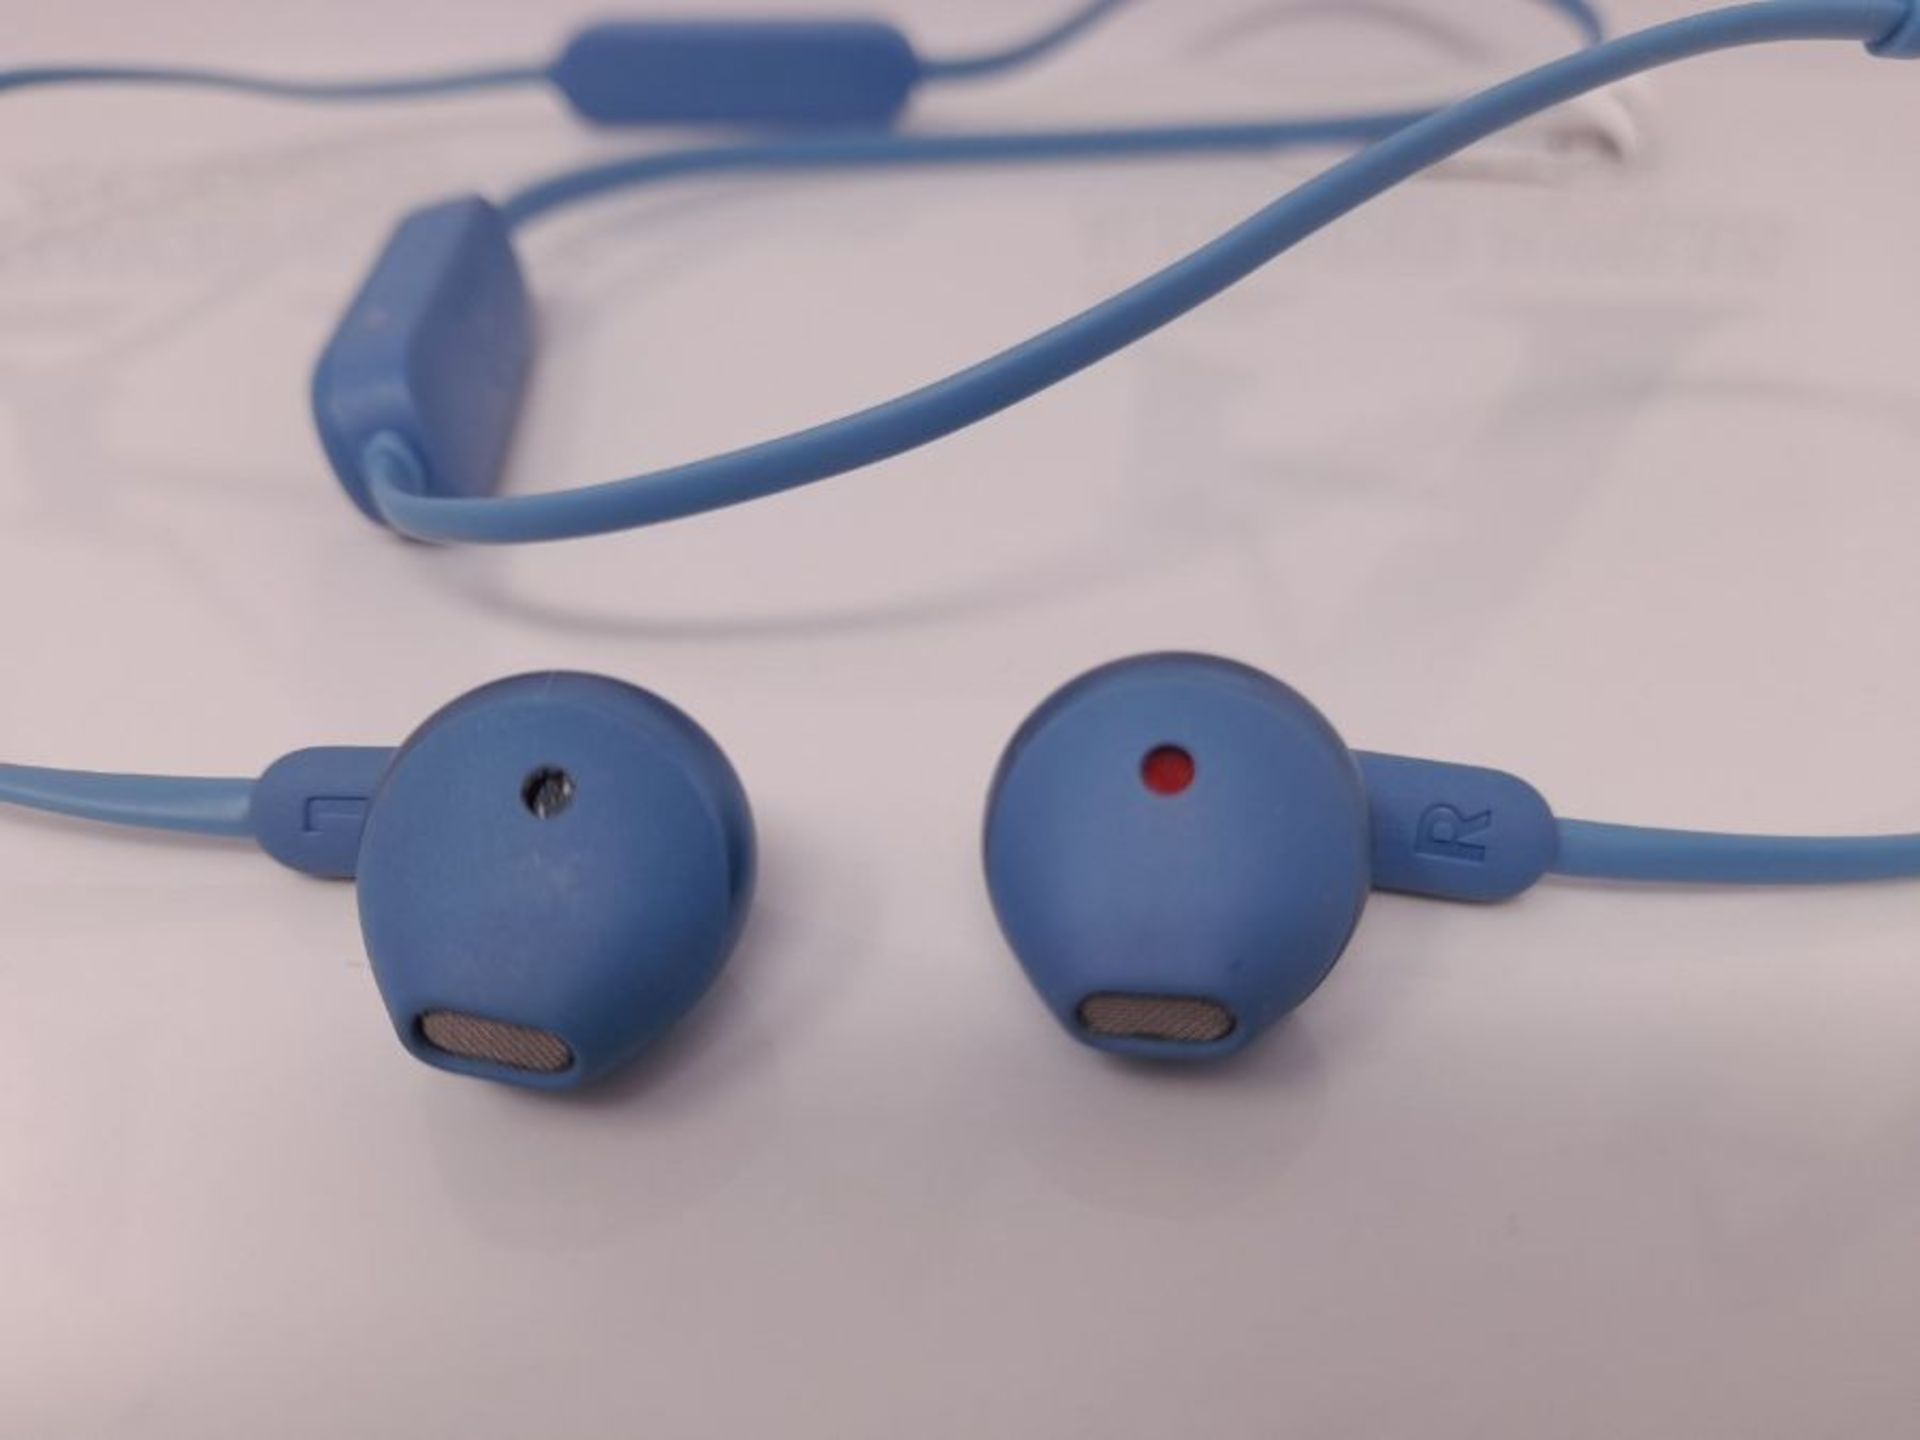 JBL TUNE 215BT - Wireless earbud headphones with Bluetooth 5.0, built-in microphone, a - Image 3 of 3